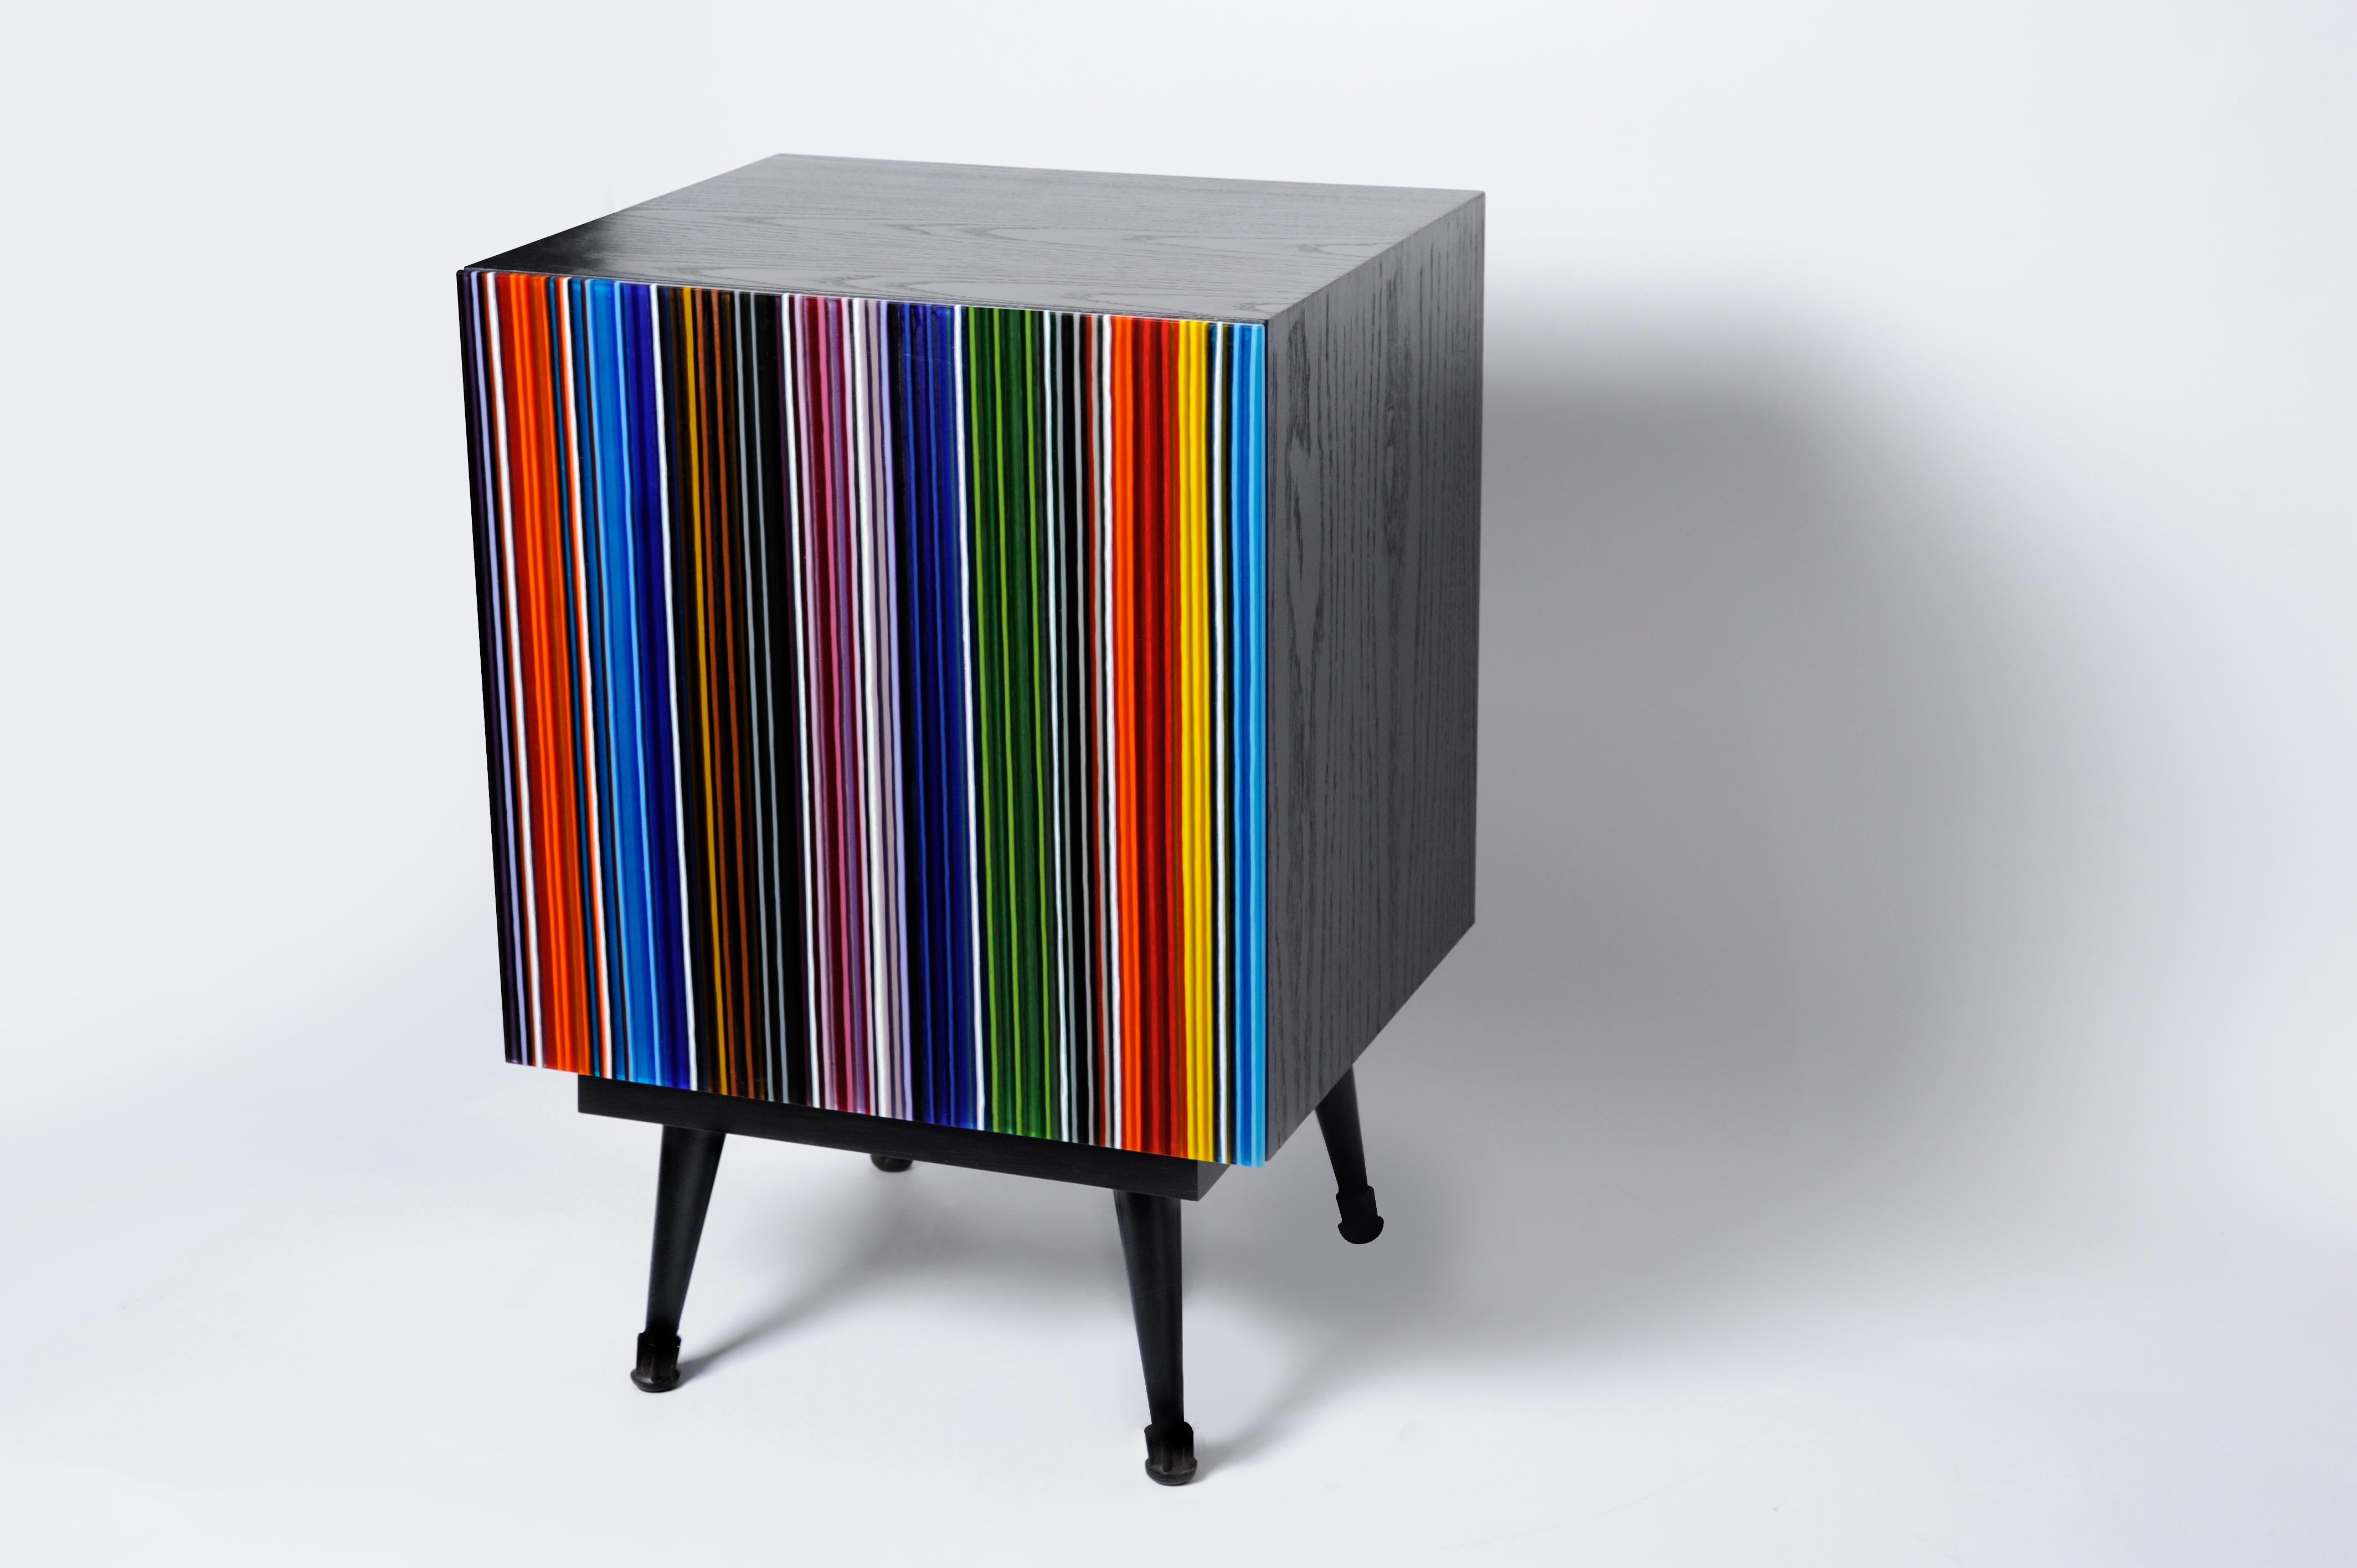 Nightstand designed by Orfeo Quagliata in collaboration with Taracea Furniture. An object of fused glass created with the exclusive barcode technique. The barcode´s retro design mixed with designer's exceptional glass expertise put together a